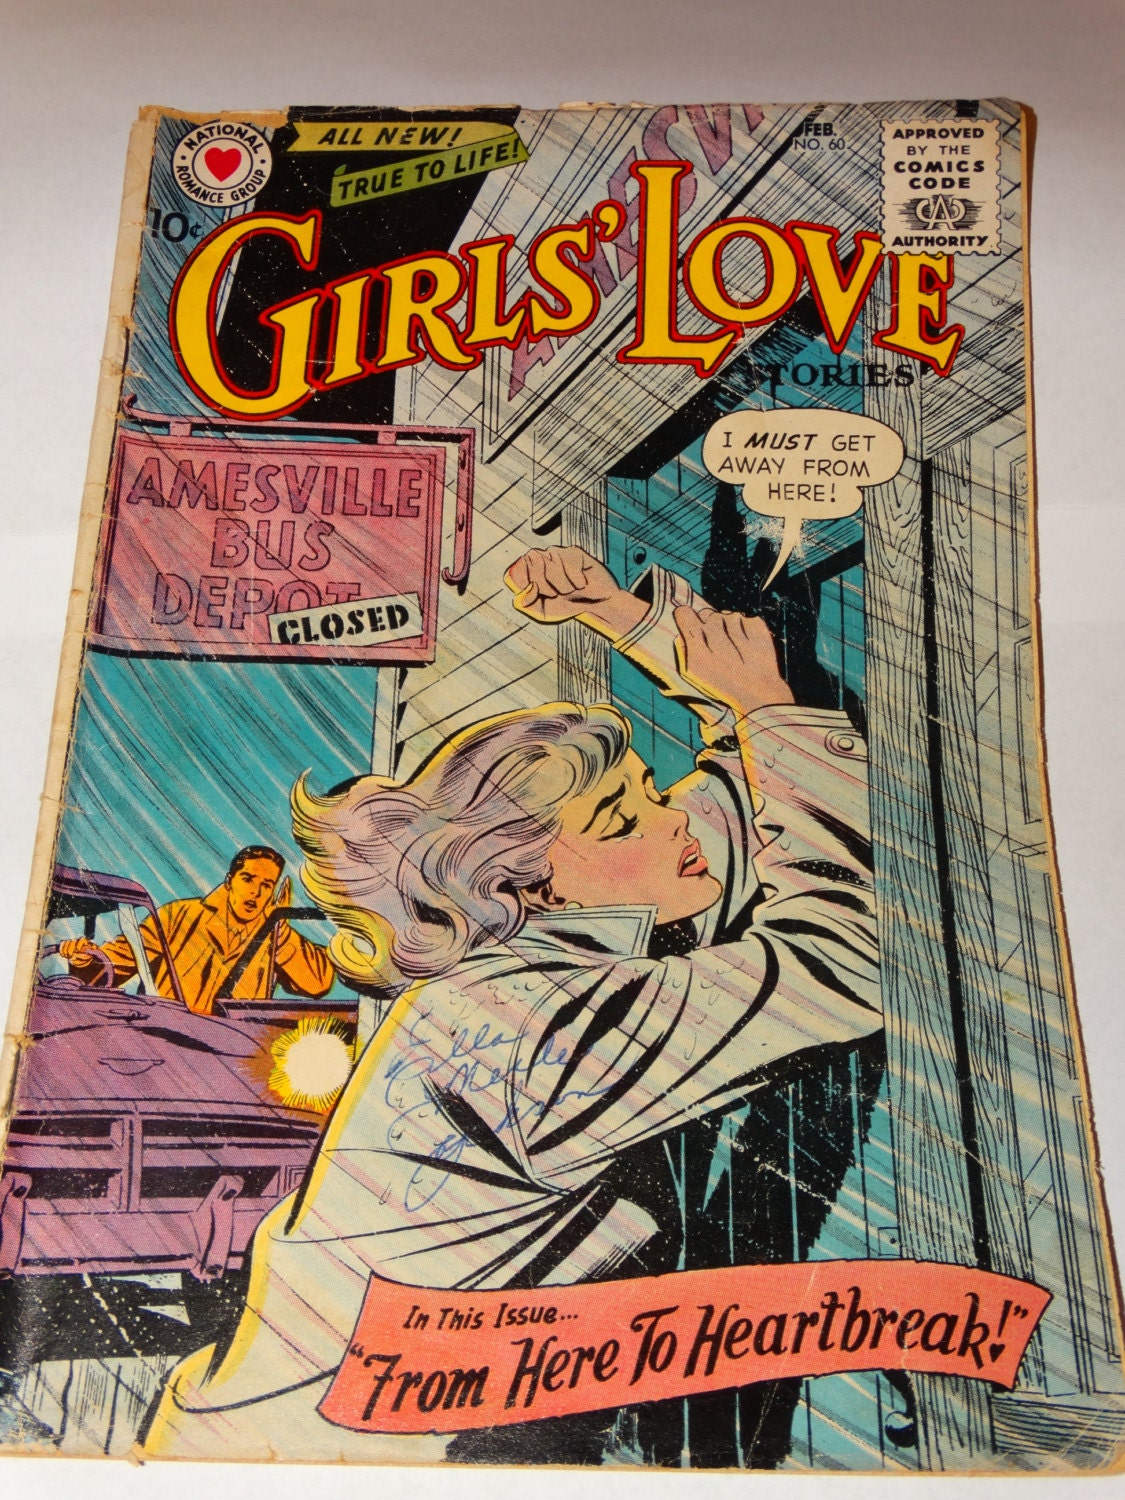 1959 Girls Love Romance Comic Book From Here to Heartbreak pic